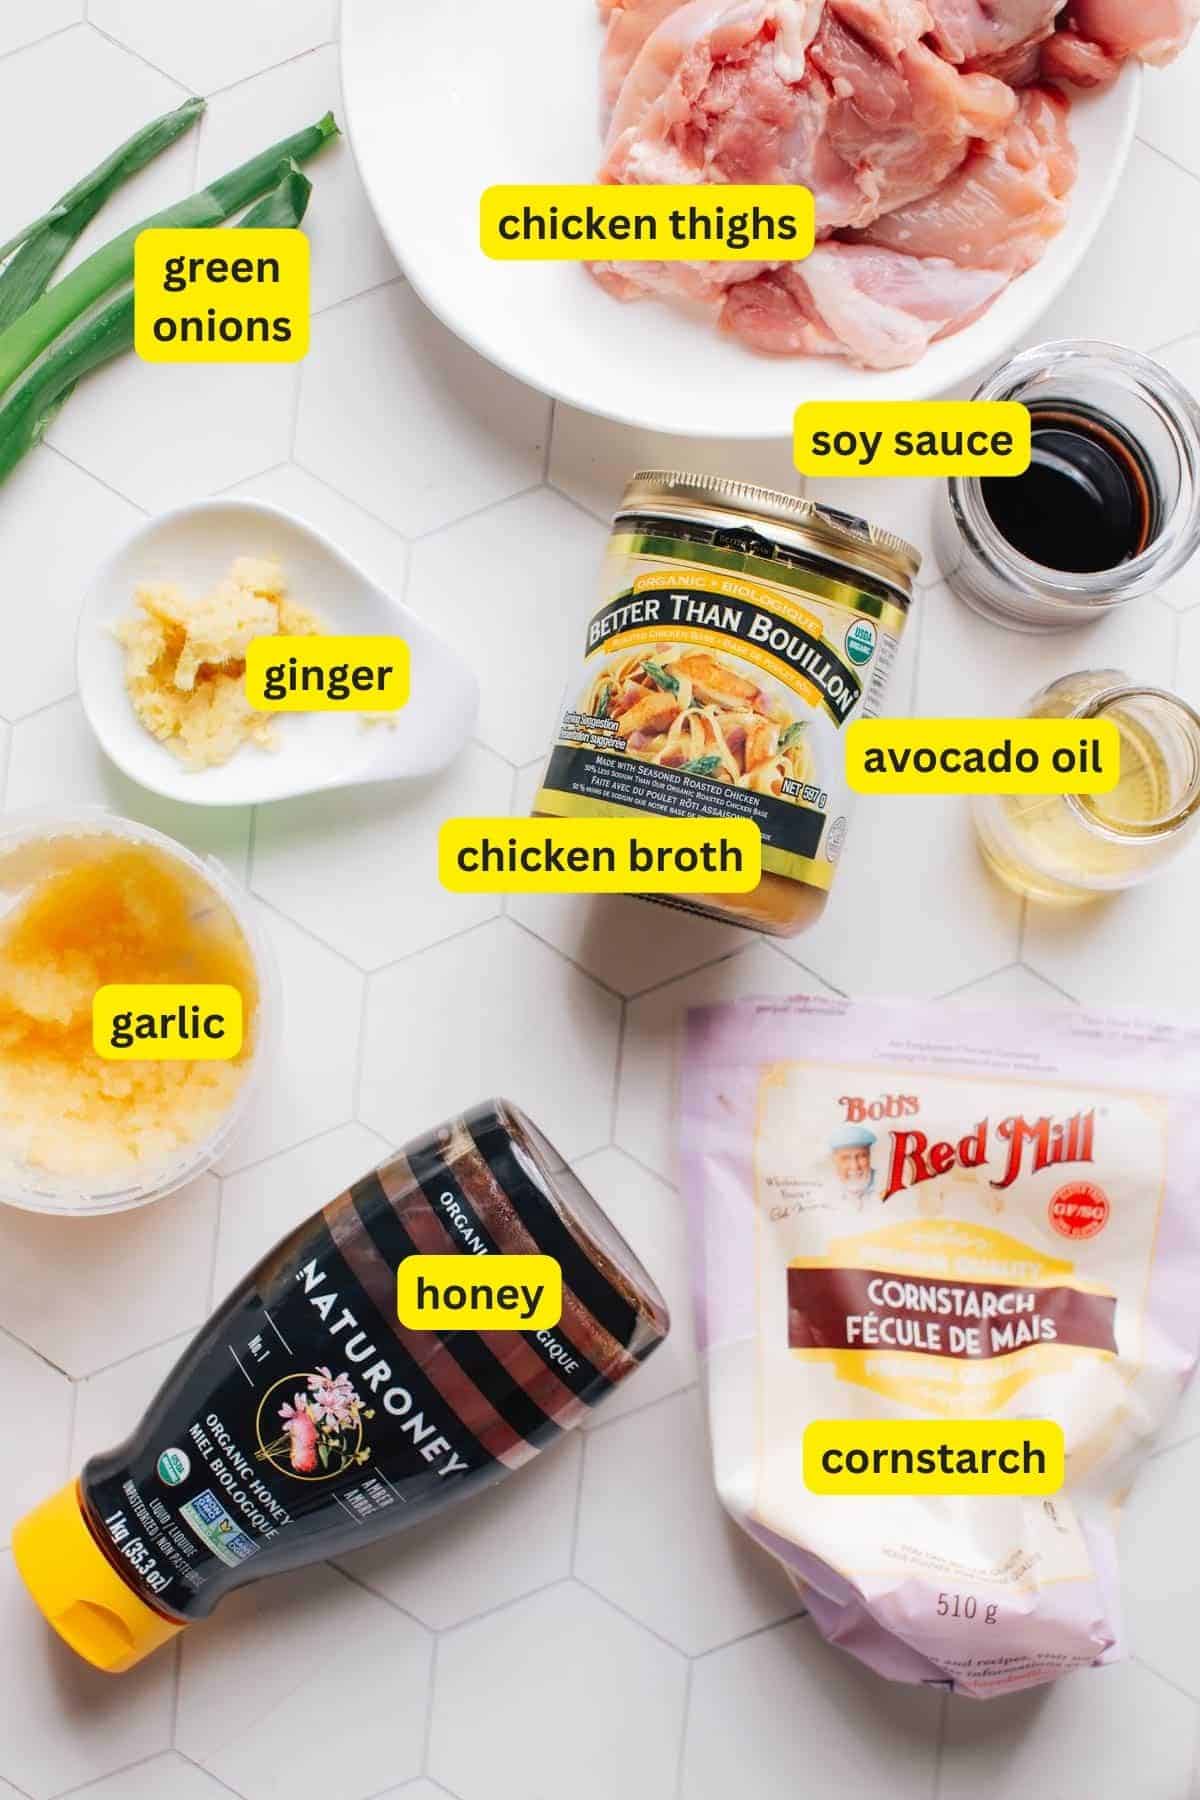 On the kitchen countertop, the ingredients for Garlic Ginger Chicken are laid out, including chicken thighs, garlic, ginger, cornstarch, green onions, honey, soy sauce, chicken broth, and avocado oil.